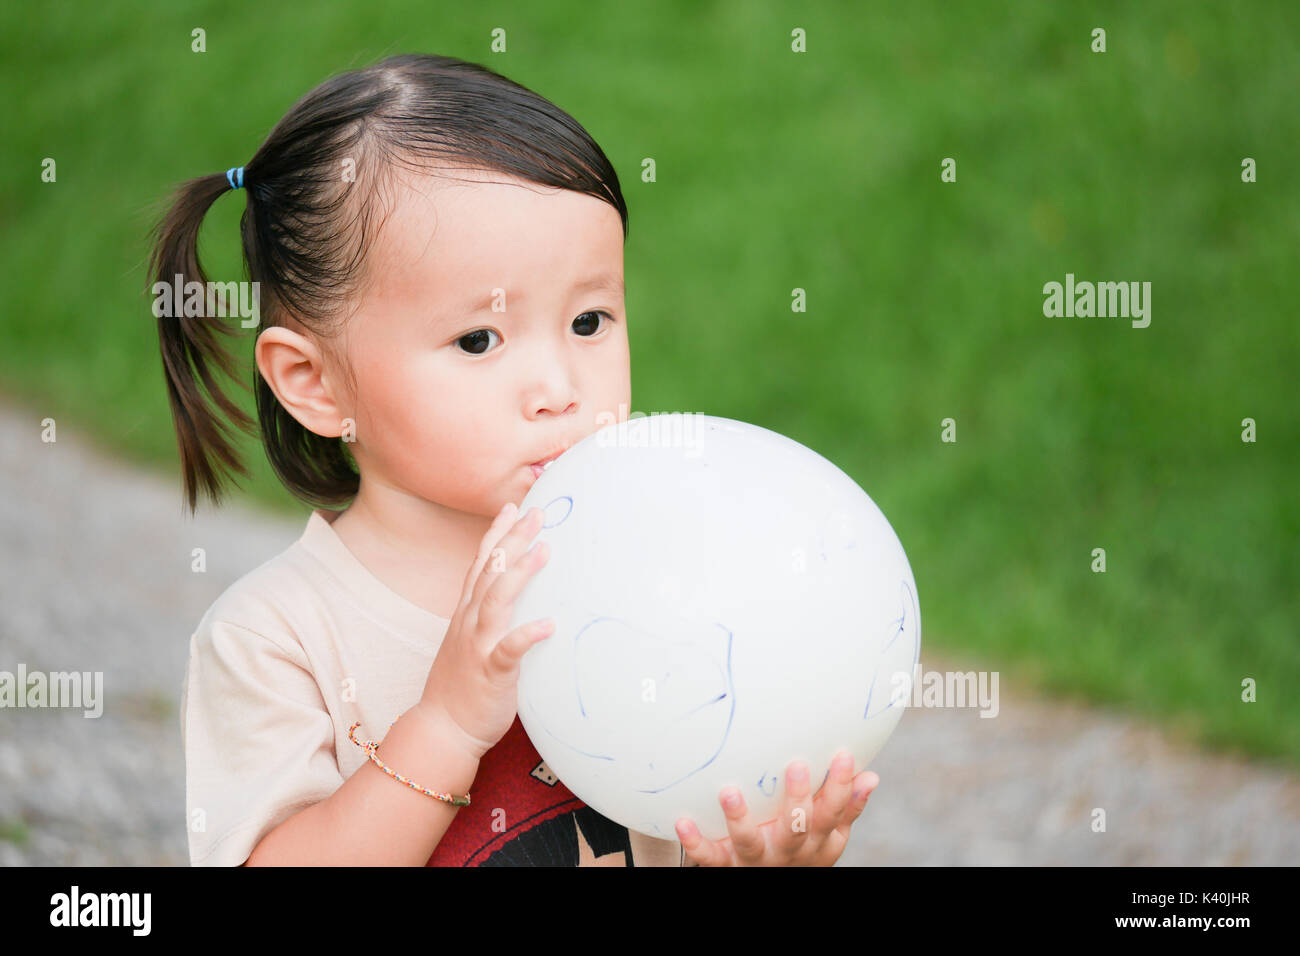 Blowing Up Balloon:Close up portrait of little girl blowing up a balloon in the green garden Stock Photo